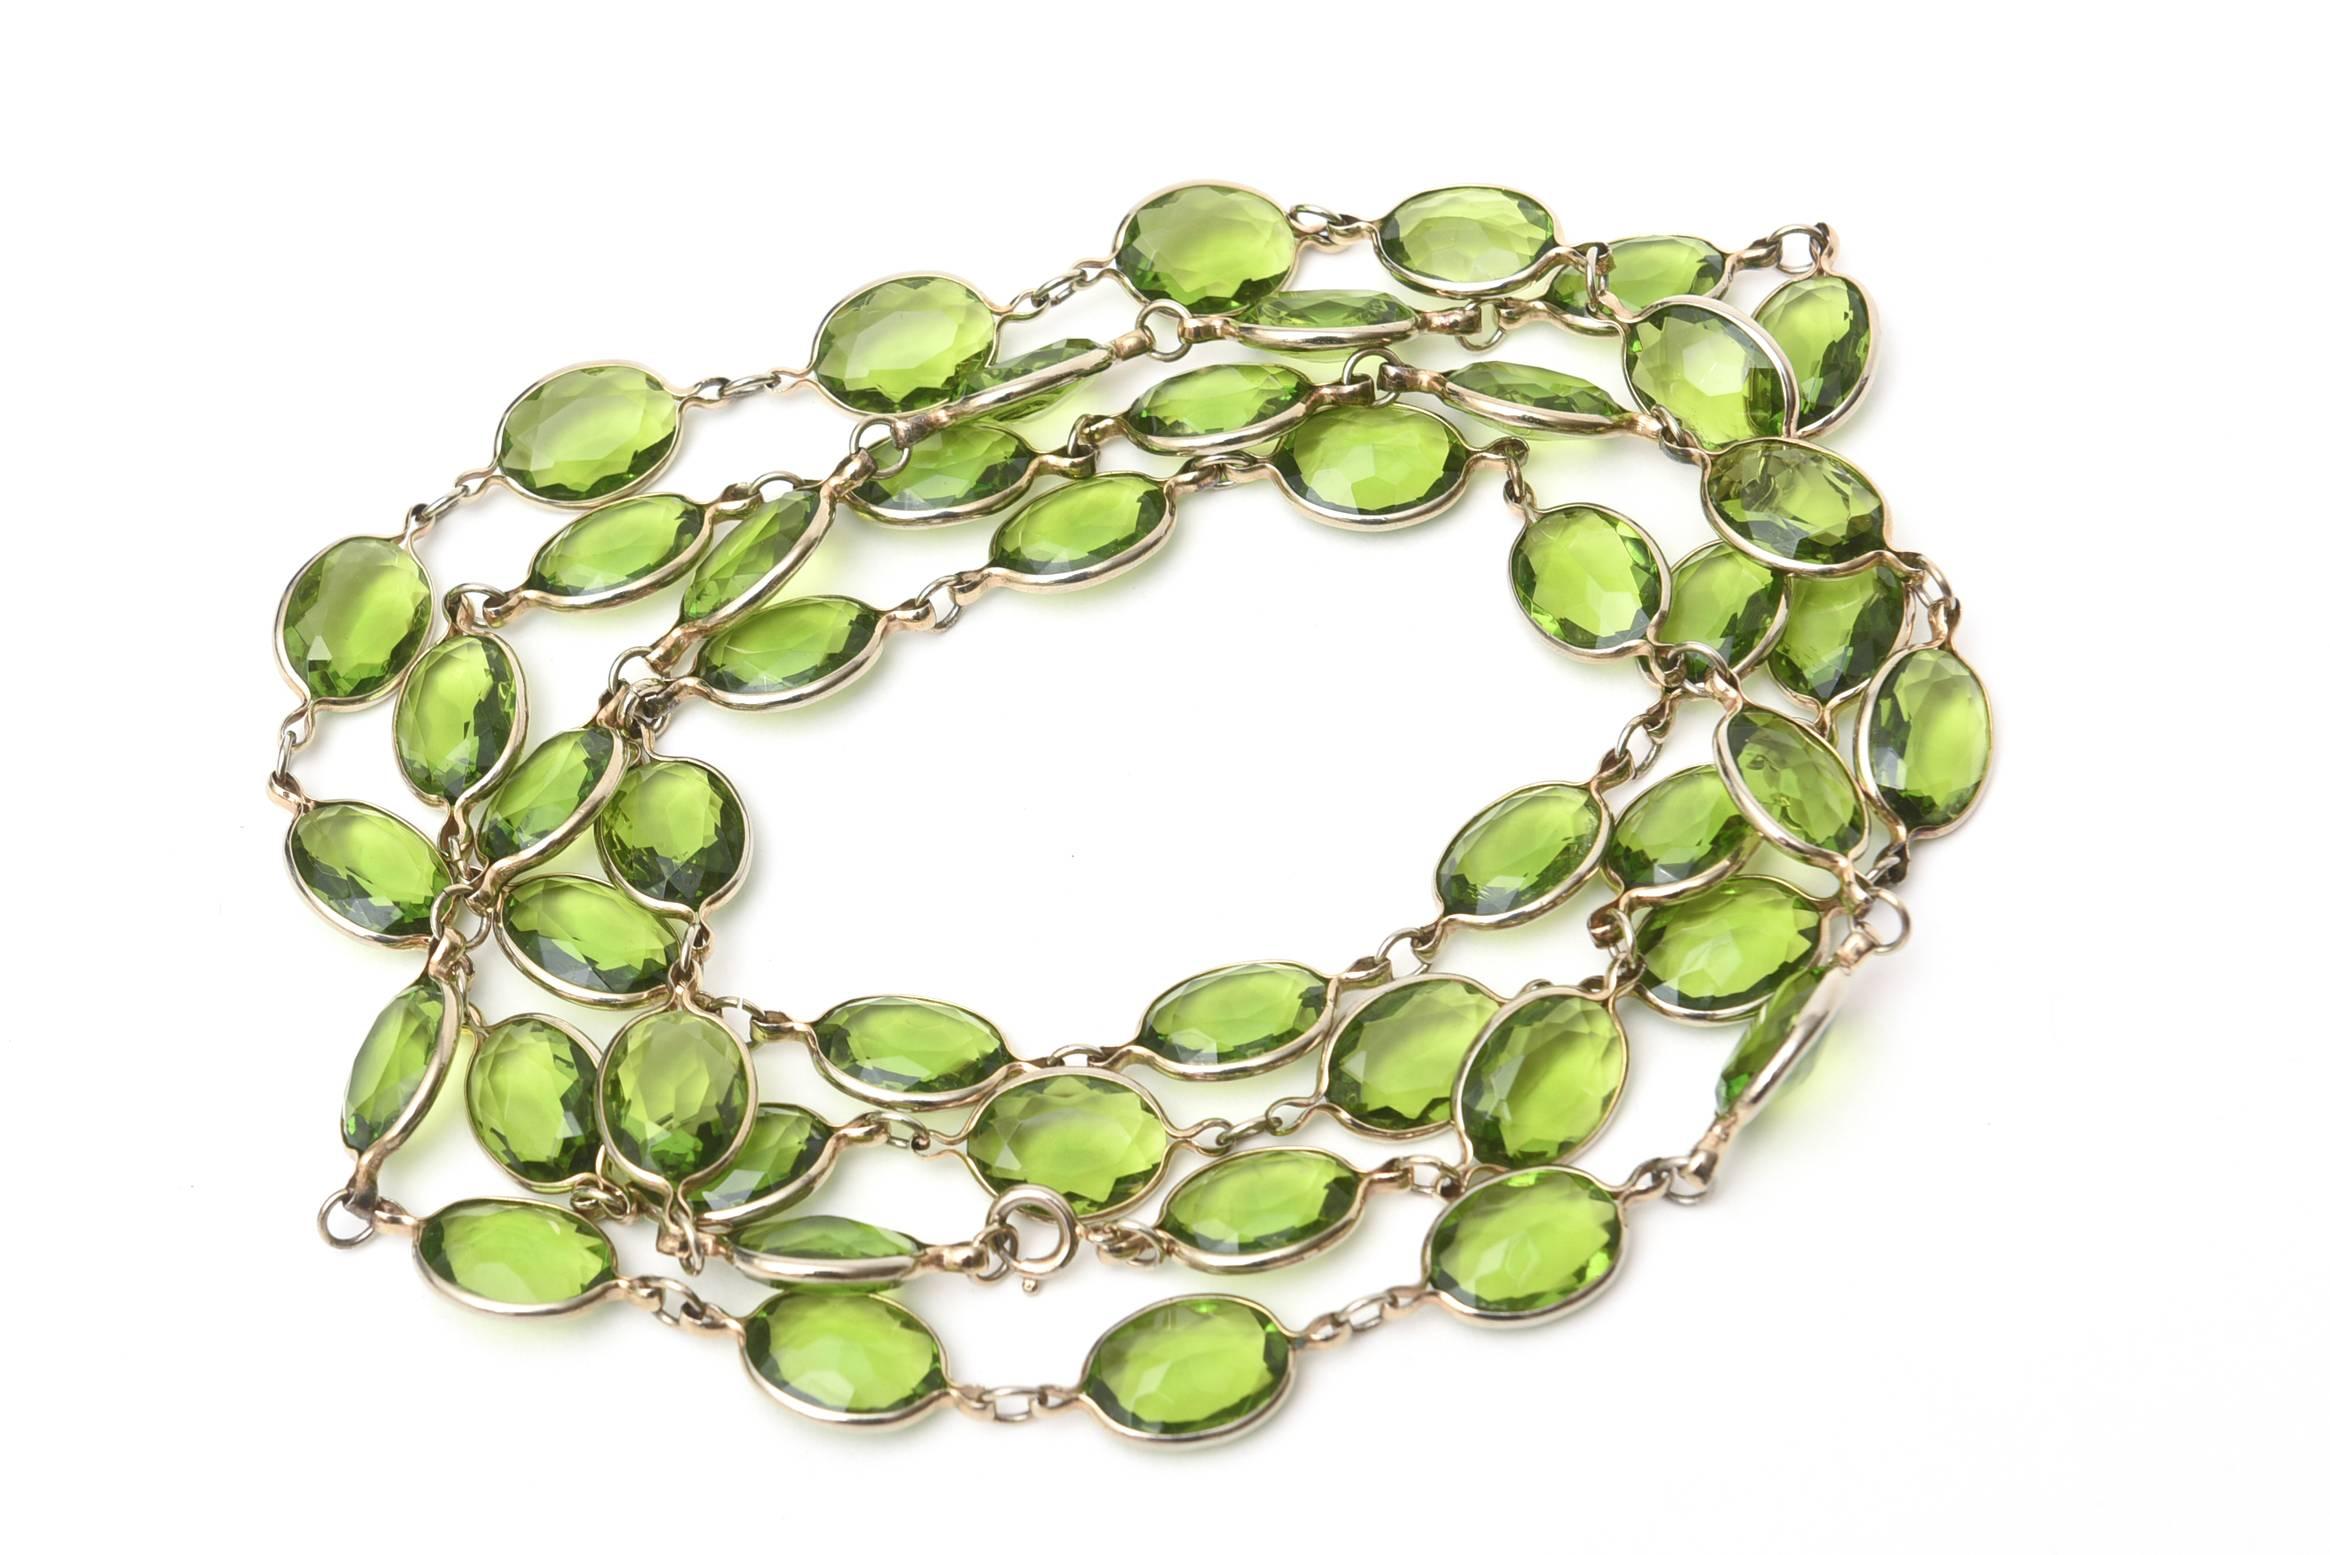 This long strand of chartreuse glass chain necklace can be doubled or tripled on a neck. it is 29